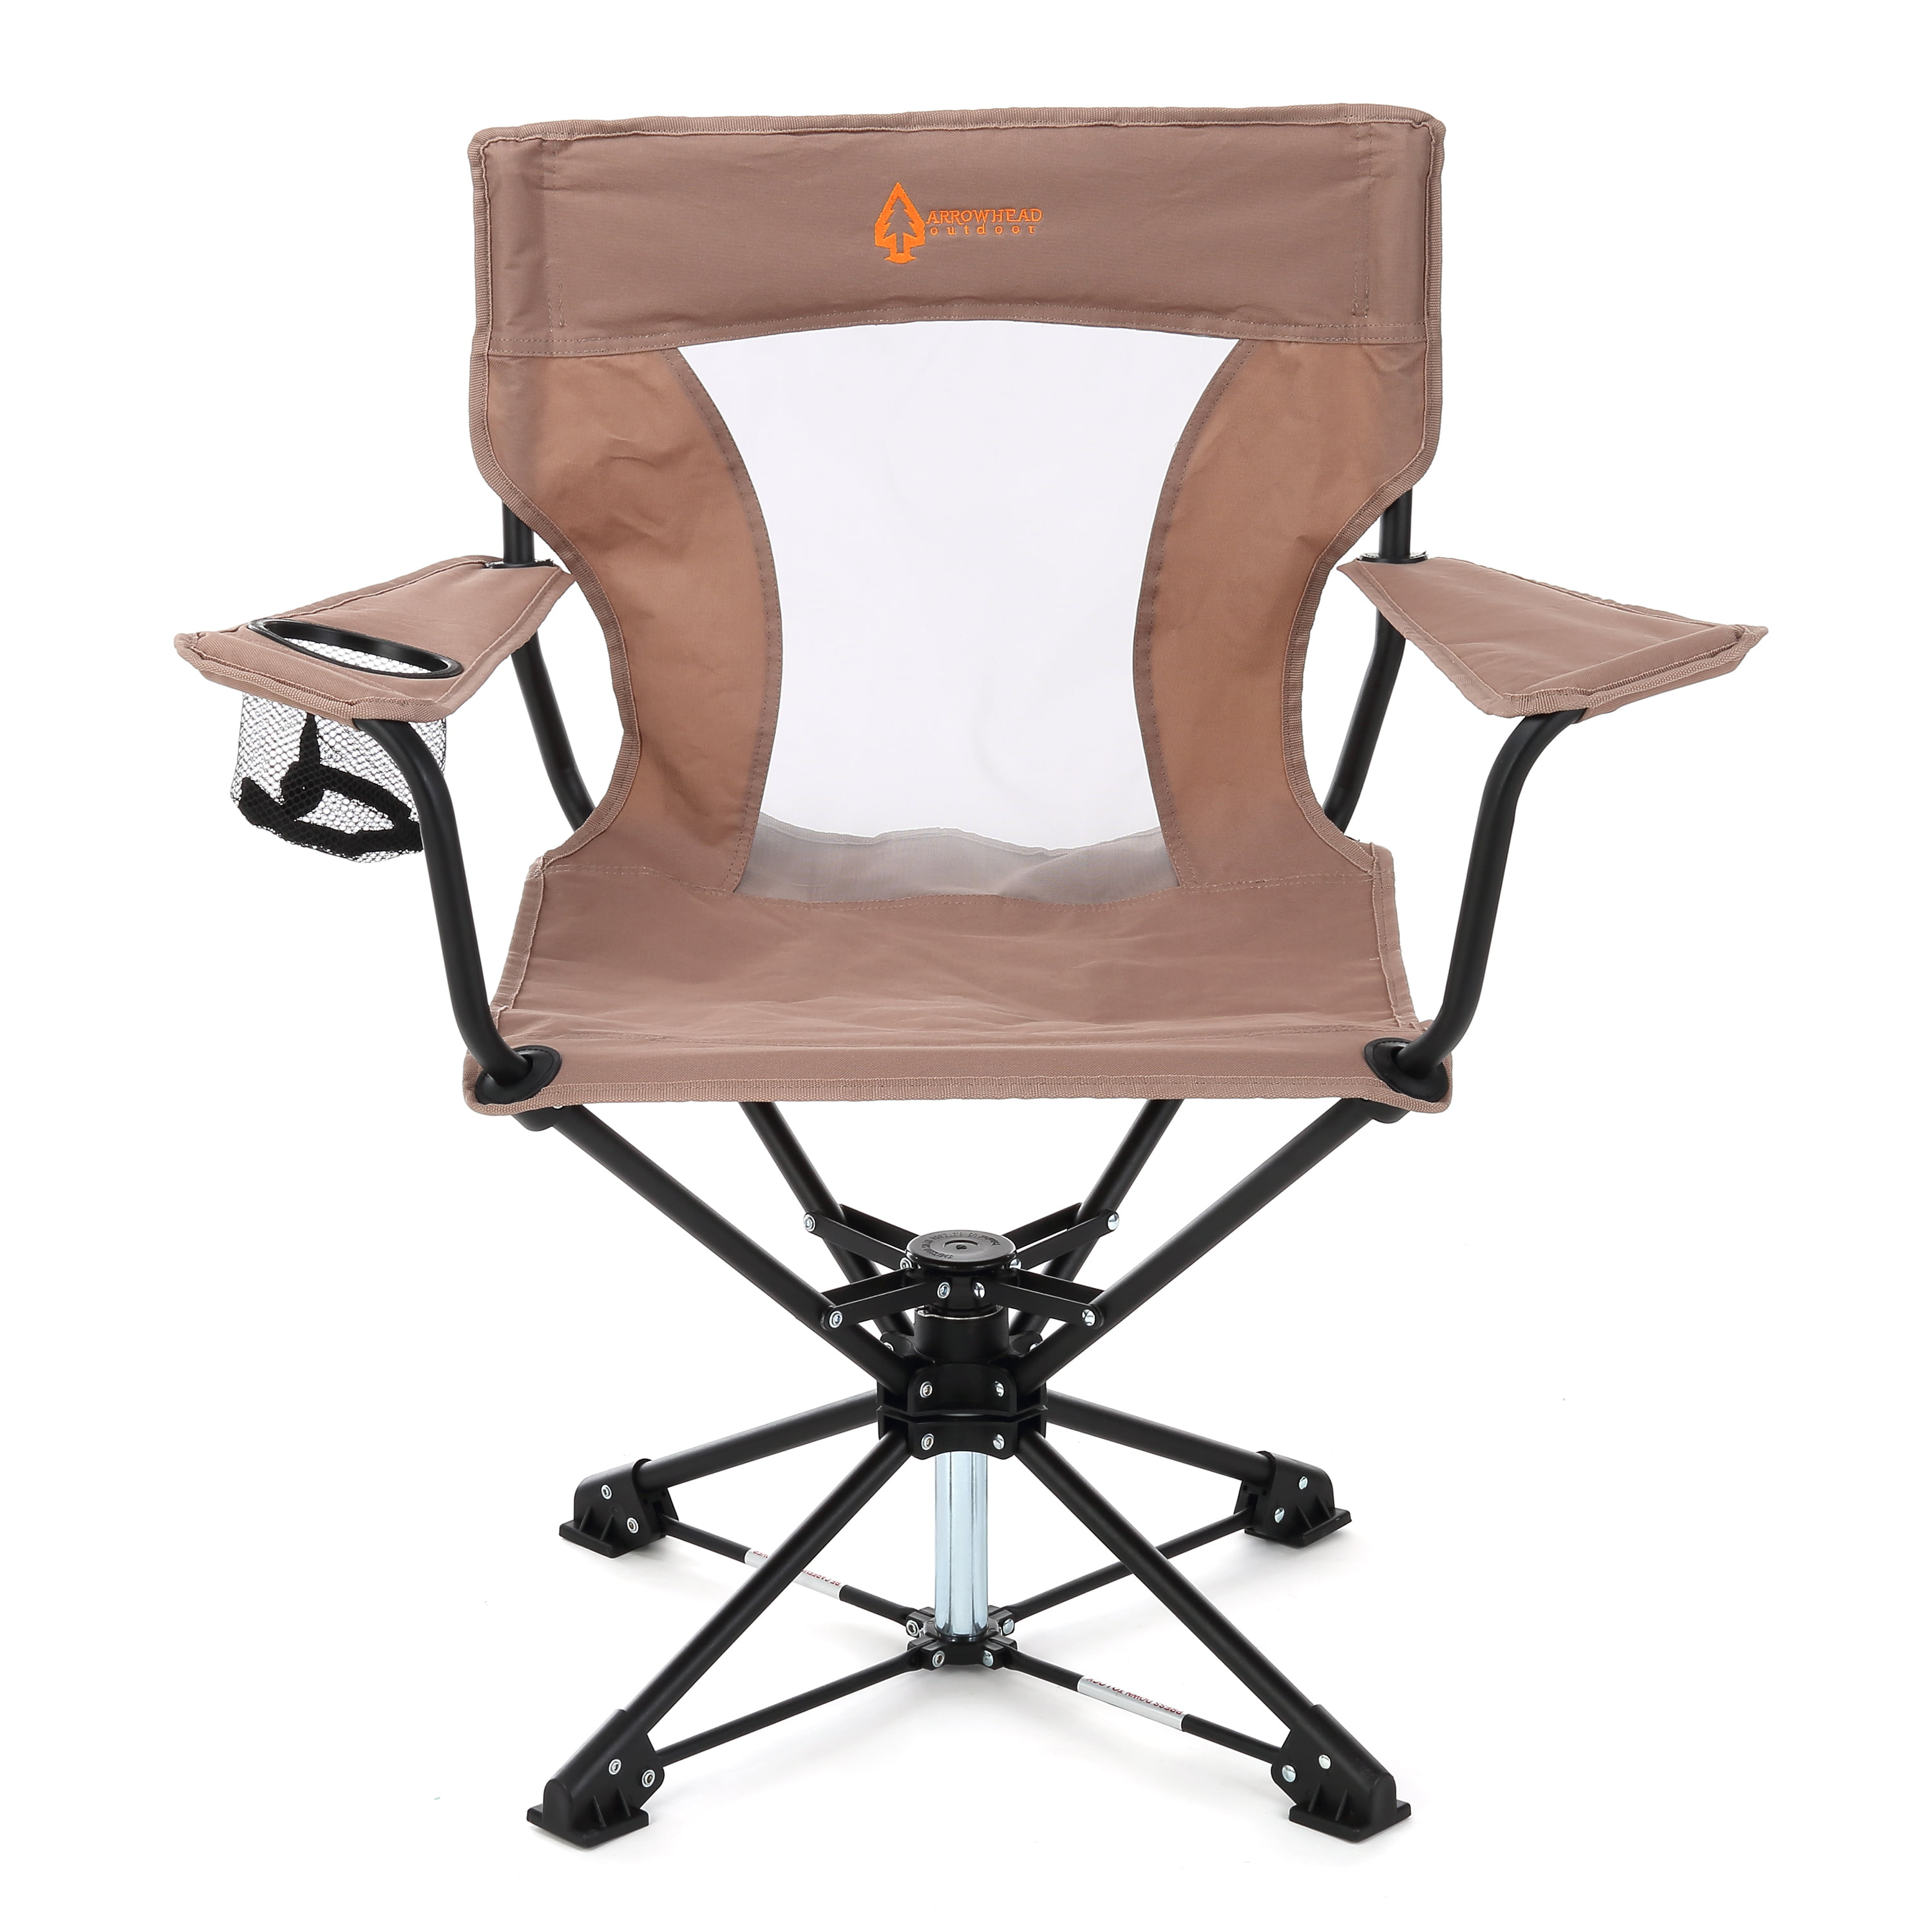 ARROWHEAD OUTDOOR 360° Degree Swivel Hunting Chair w/ Armrests 